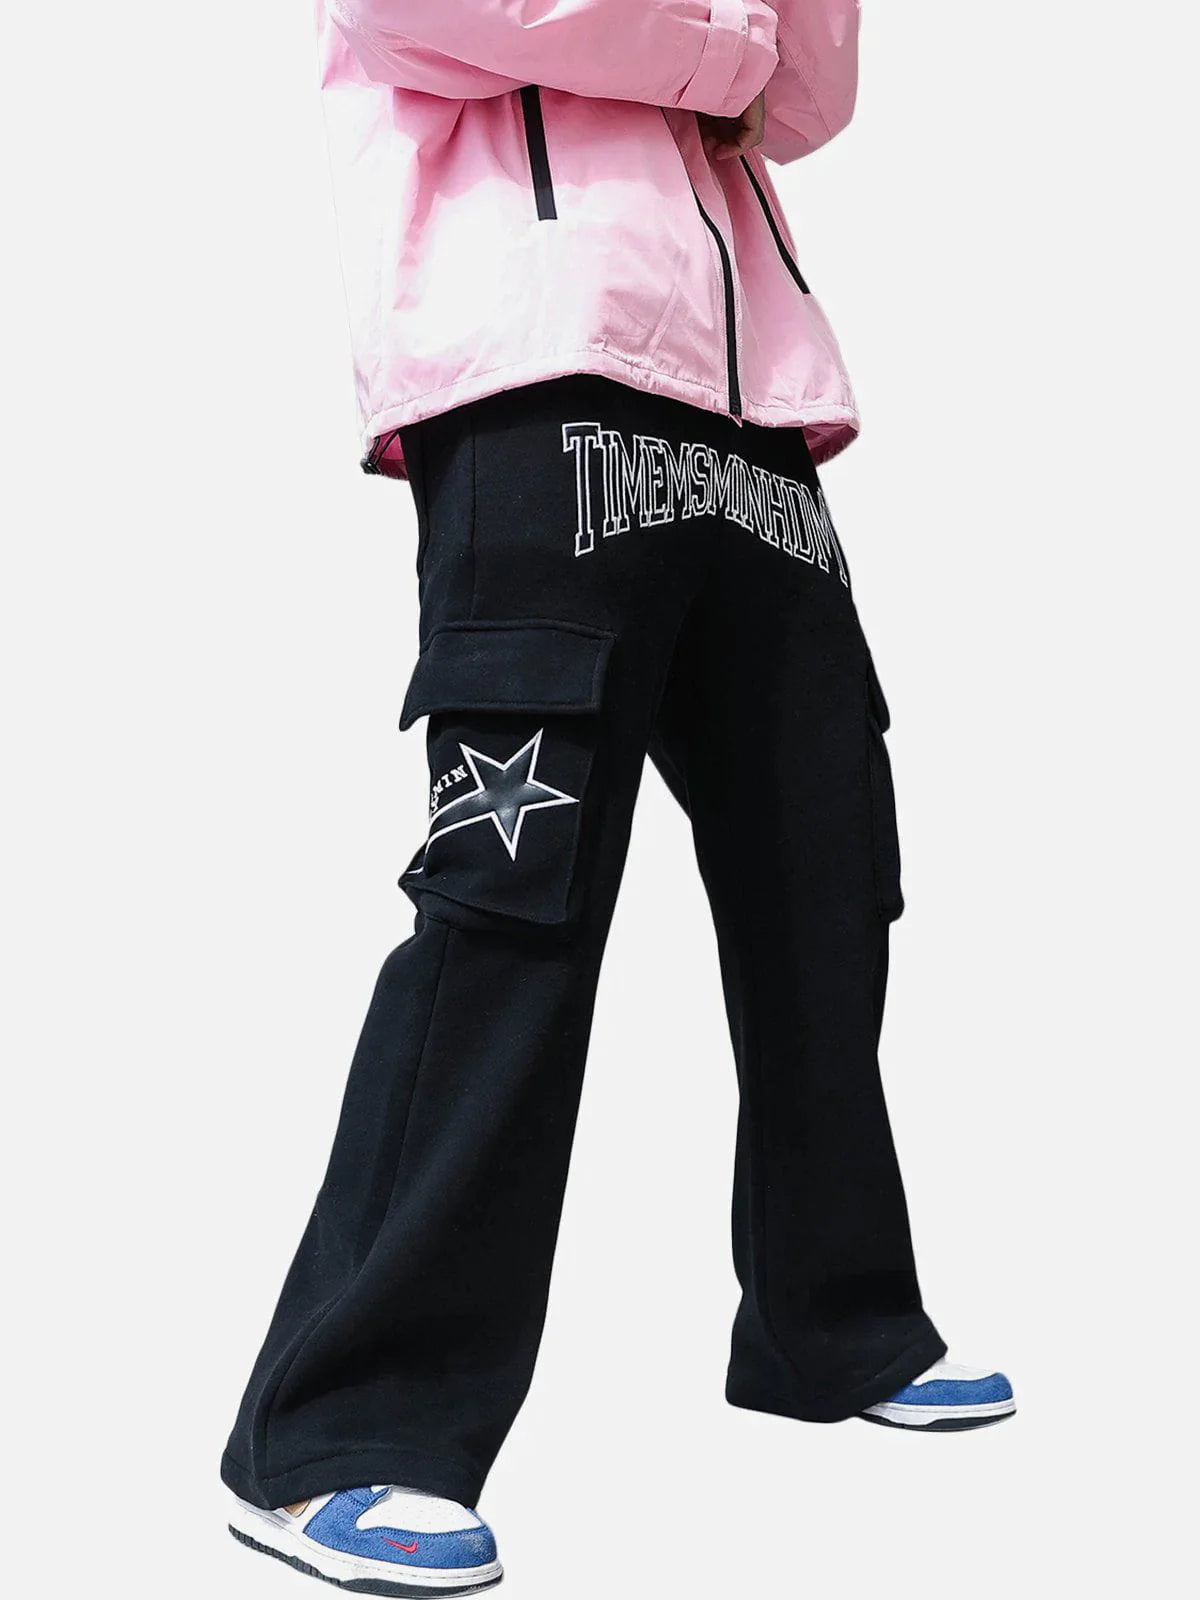 Majesda® - Embroidered Lettering Stars Fleece Pants outfit ideas streetwear fashion